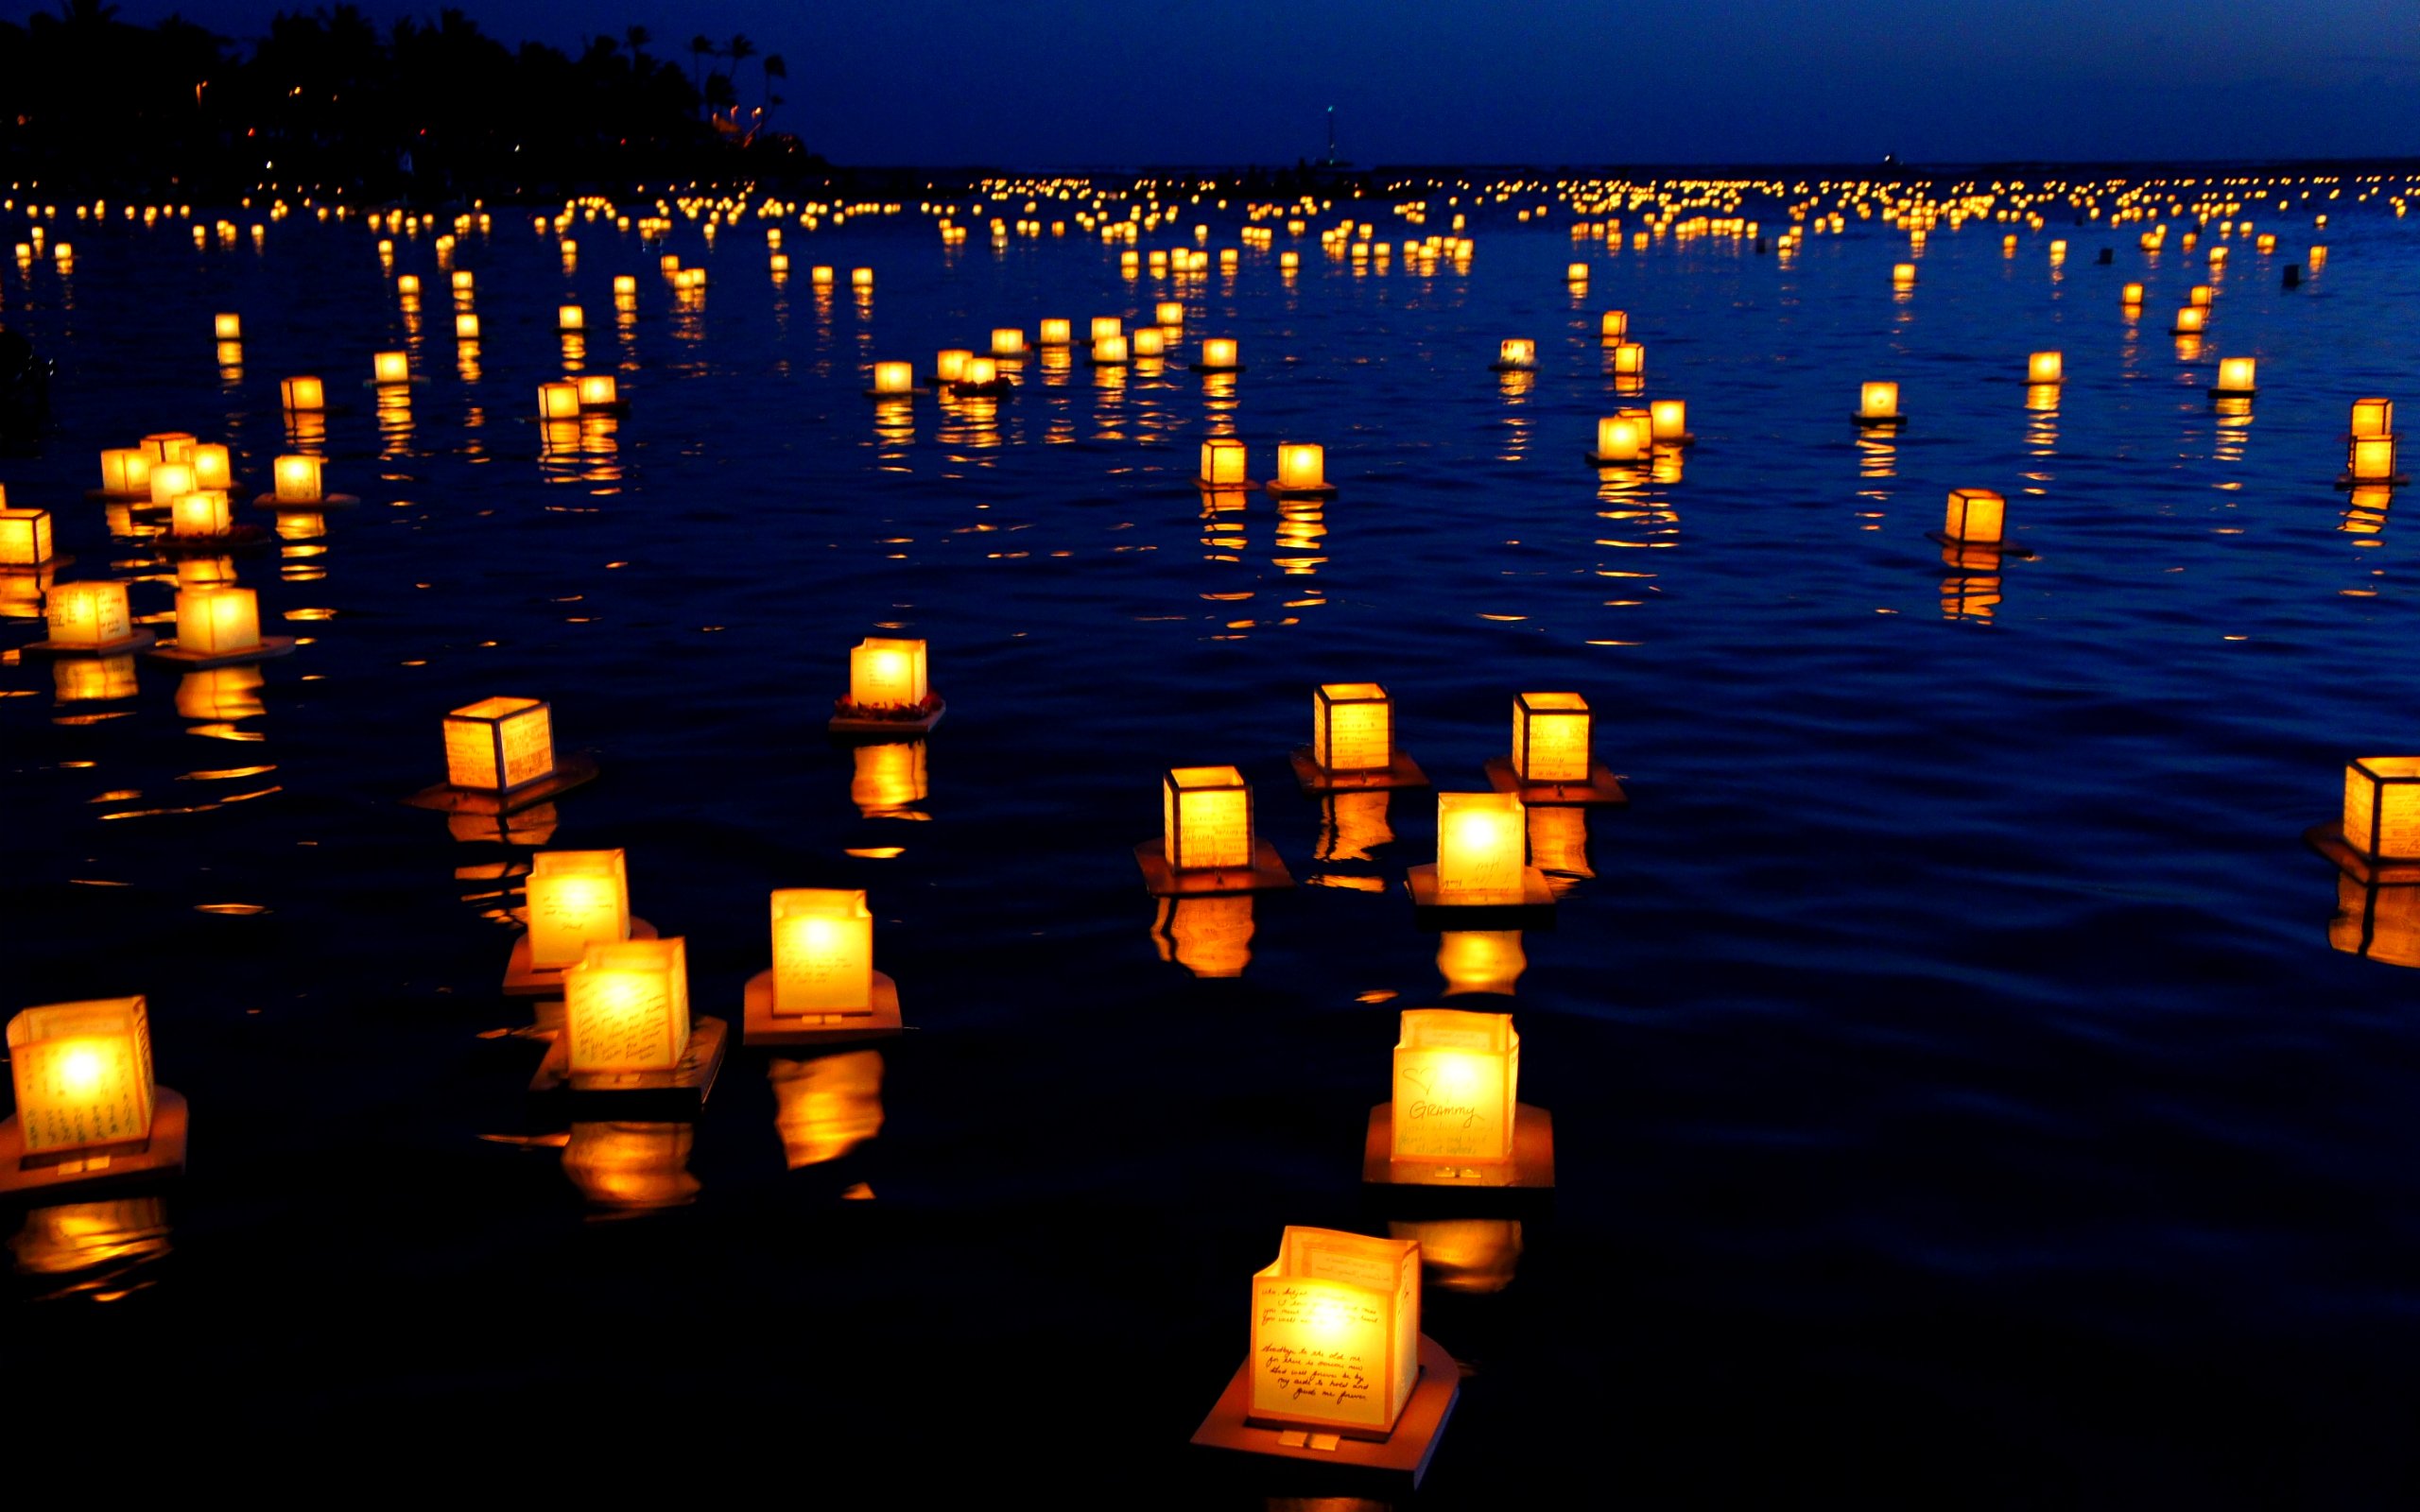 Wallpaper Festival of Lights   Floating Lanterns is a great wallpaper 2560x1600